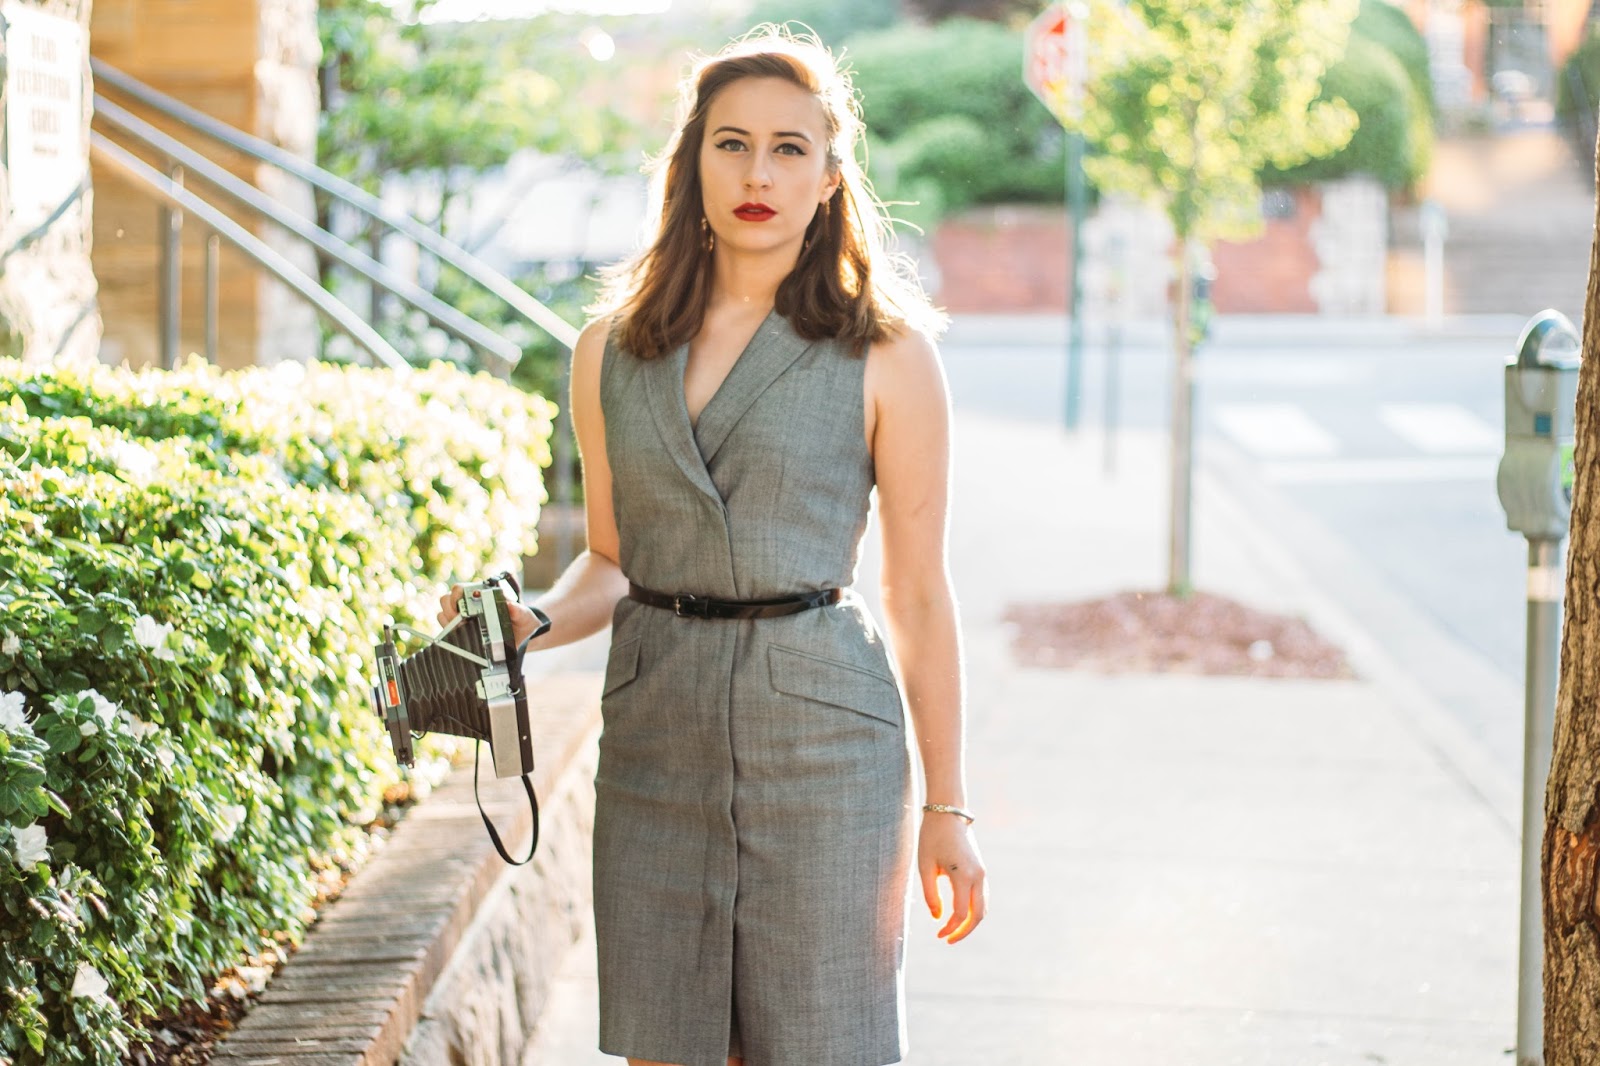 banana republic, style, classic style, fashion, blogger, vintage, retro, modern take, vintage inspired, screenwriting, film making, writer, vintage fashion blogger, old holly wood style, spring outfit, day to night outfit, 60s camera, polaroid,